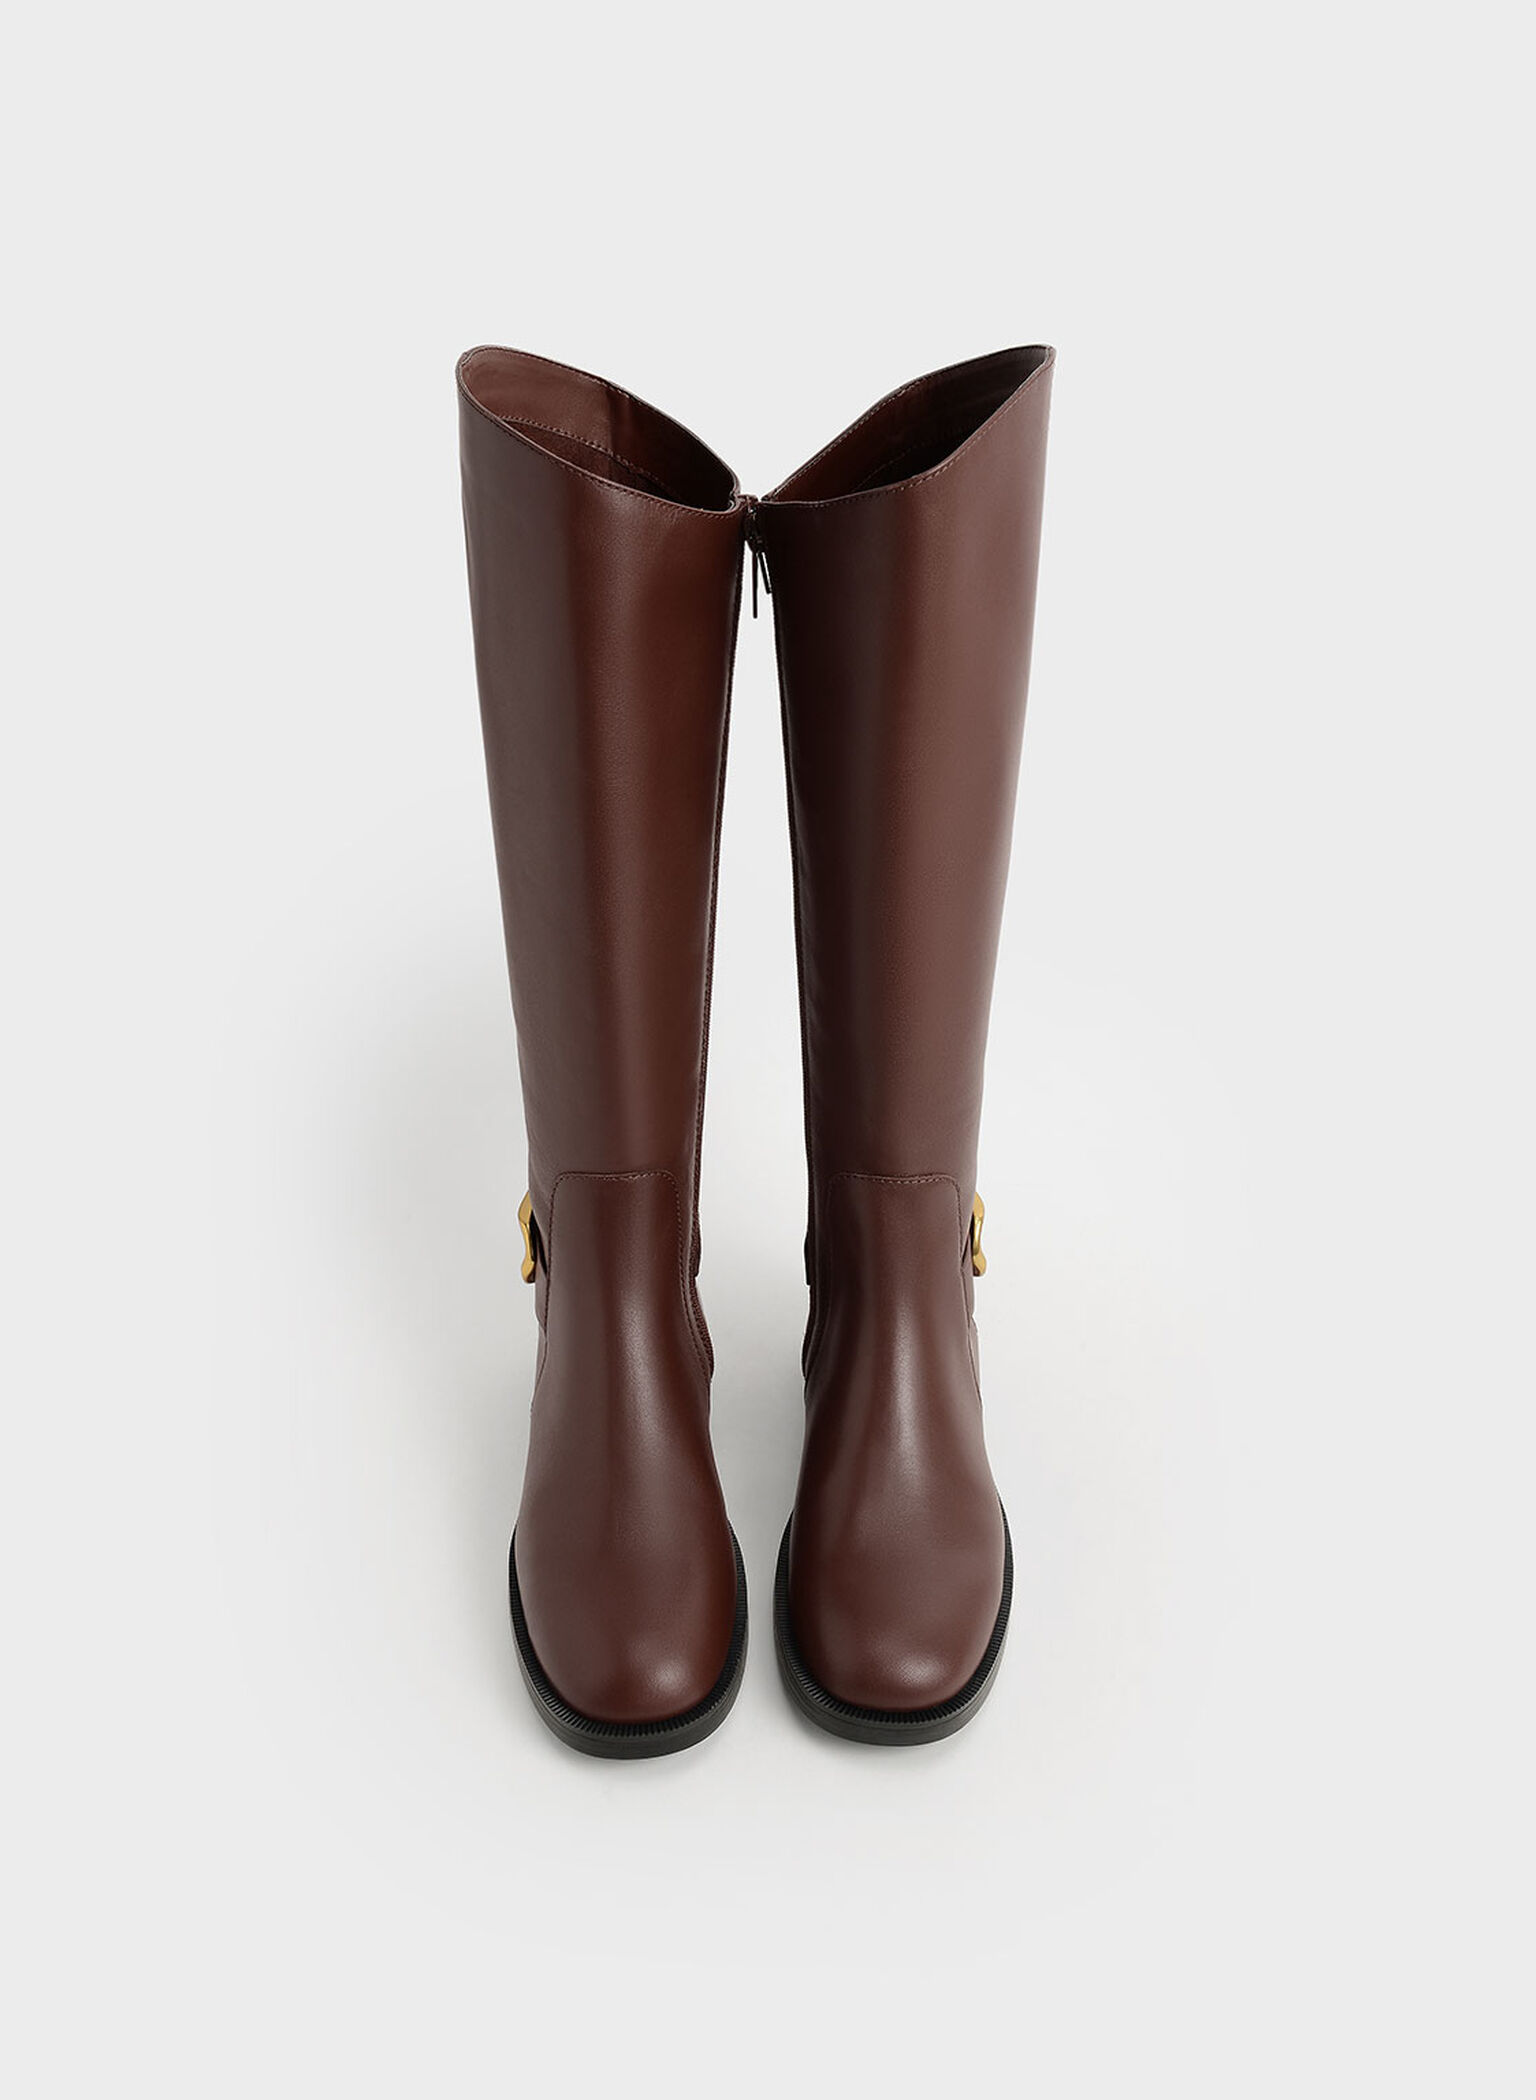 Gabine Leather Knee-High Boots, Brown, hi-res